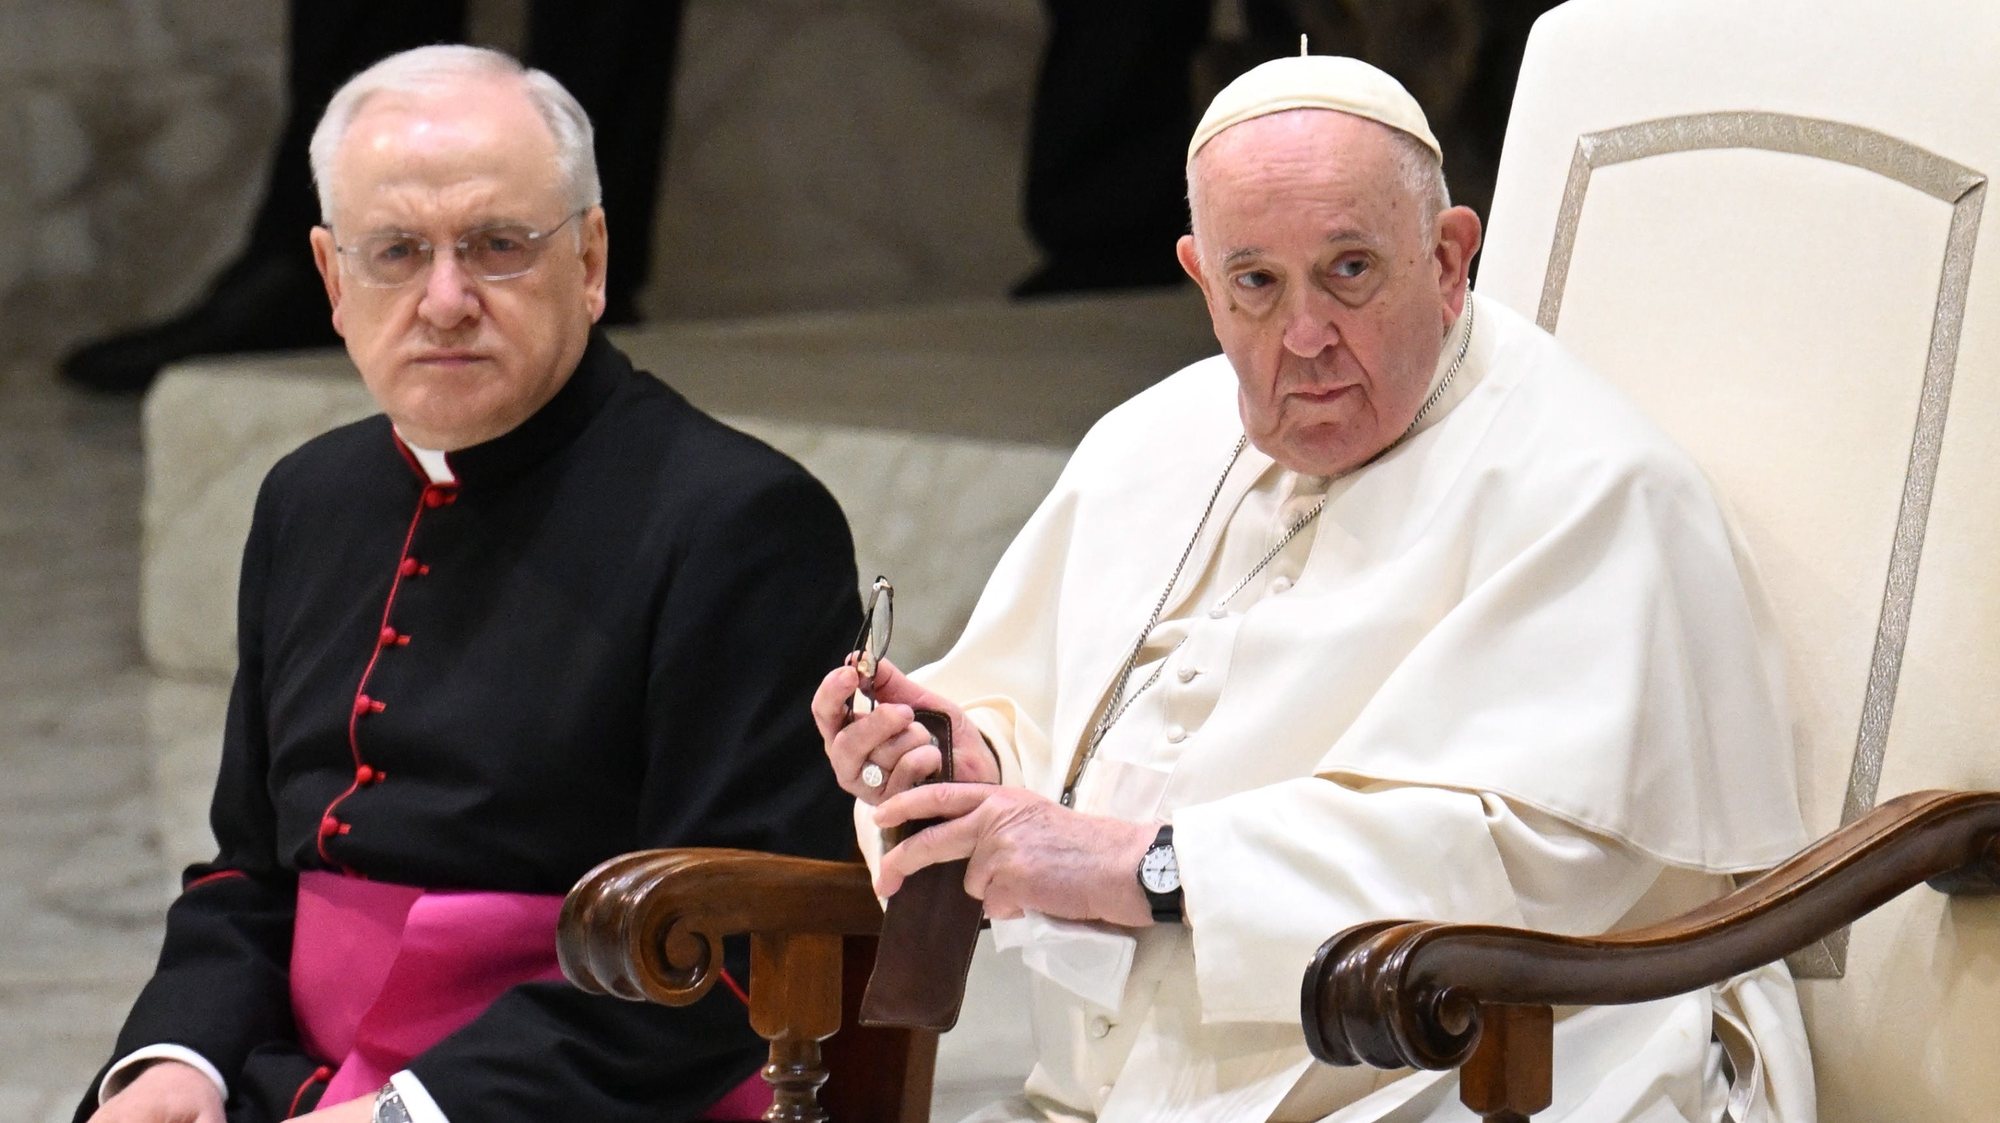 epa10428058 Monsignor Leonardo Sapienza (L) sits next to Pope Francis during the Papal Audience inside the Nervi Hall at the Vatican, 25 January 2023. Papal Audiences are held every Wednesday at the Vatican, giving faithfuls the chance to receive the Apostolic Blessing.  EPA/CLAUDIO PERI